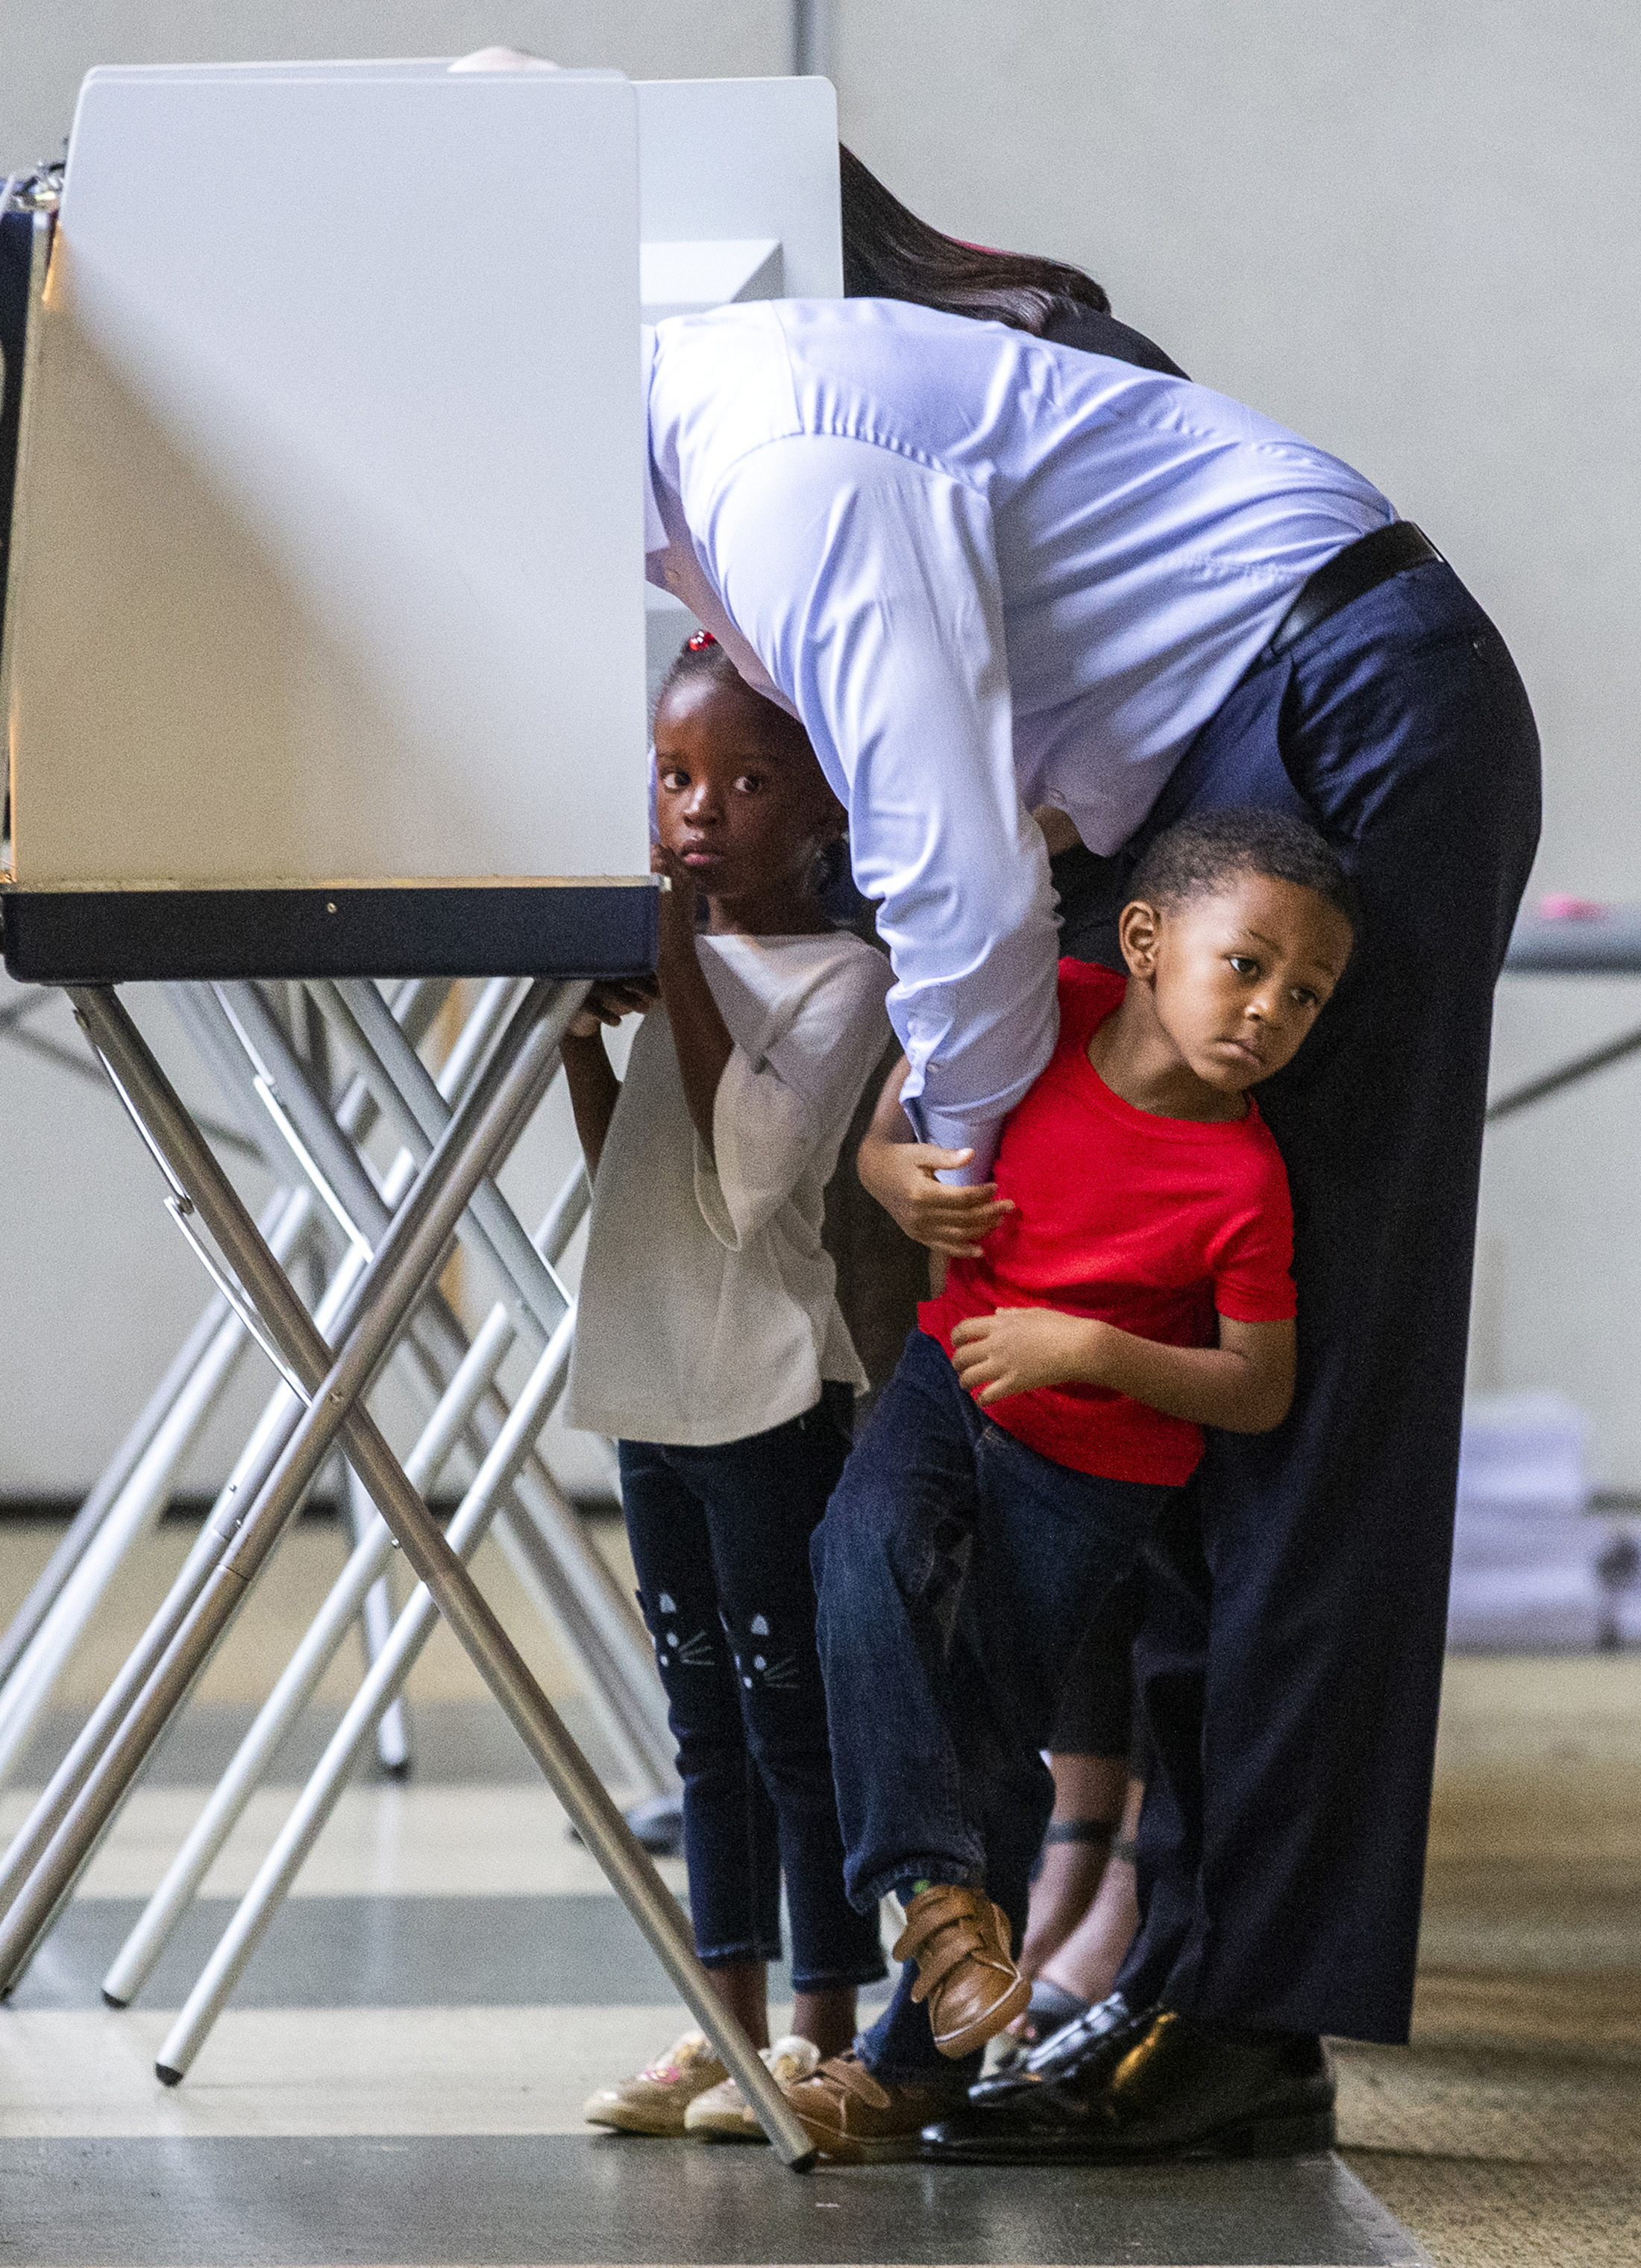 Tallahassee mayor and Democratic gubernatorial candidate Andrew Gillum casts his ballot with his four-year-old twins Caroline, left, and Jackson in Tallahassee, Fla. (Mark Wallheiser—Getty Images)